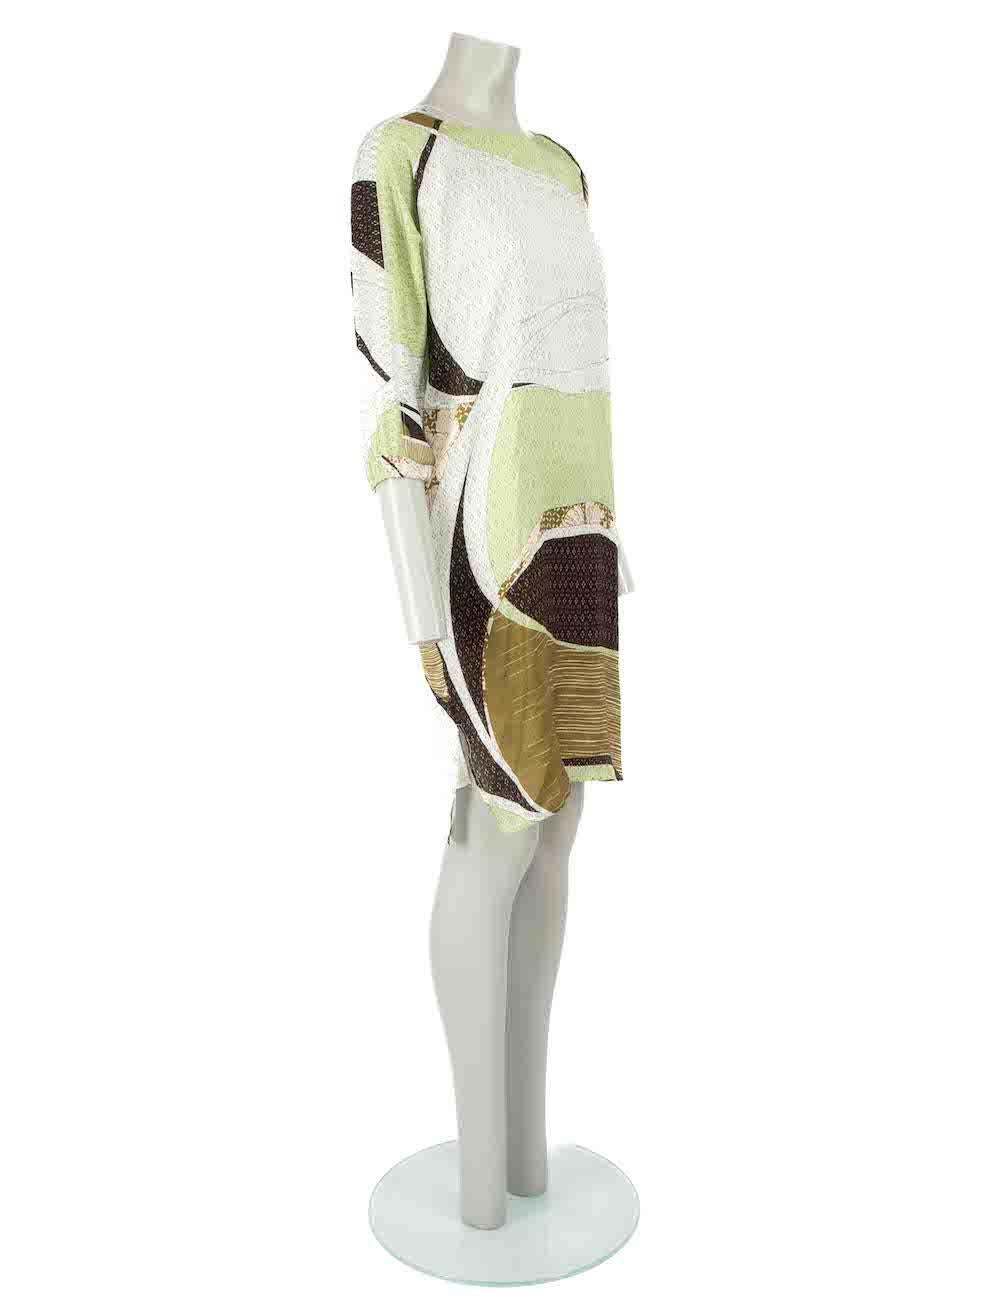 CONDITION is Very good. Minimal wear to dress is evident. Minimal wear to the neckline with makeup marks at the lining on this used Emilio Pucci designer resale item.
 
 Details
 Multicolour
 Silk
 Knee length dress
 Abstract pattern
 Round